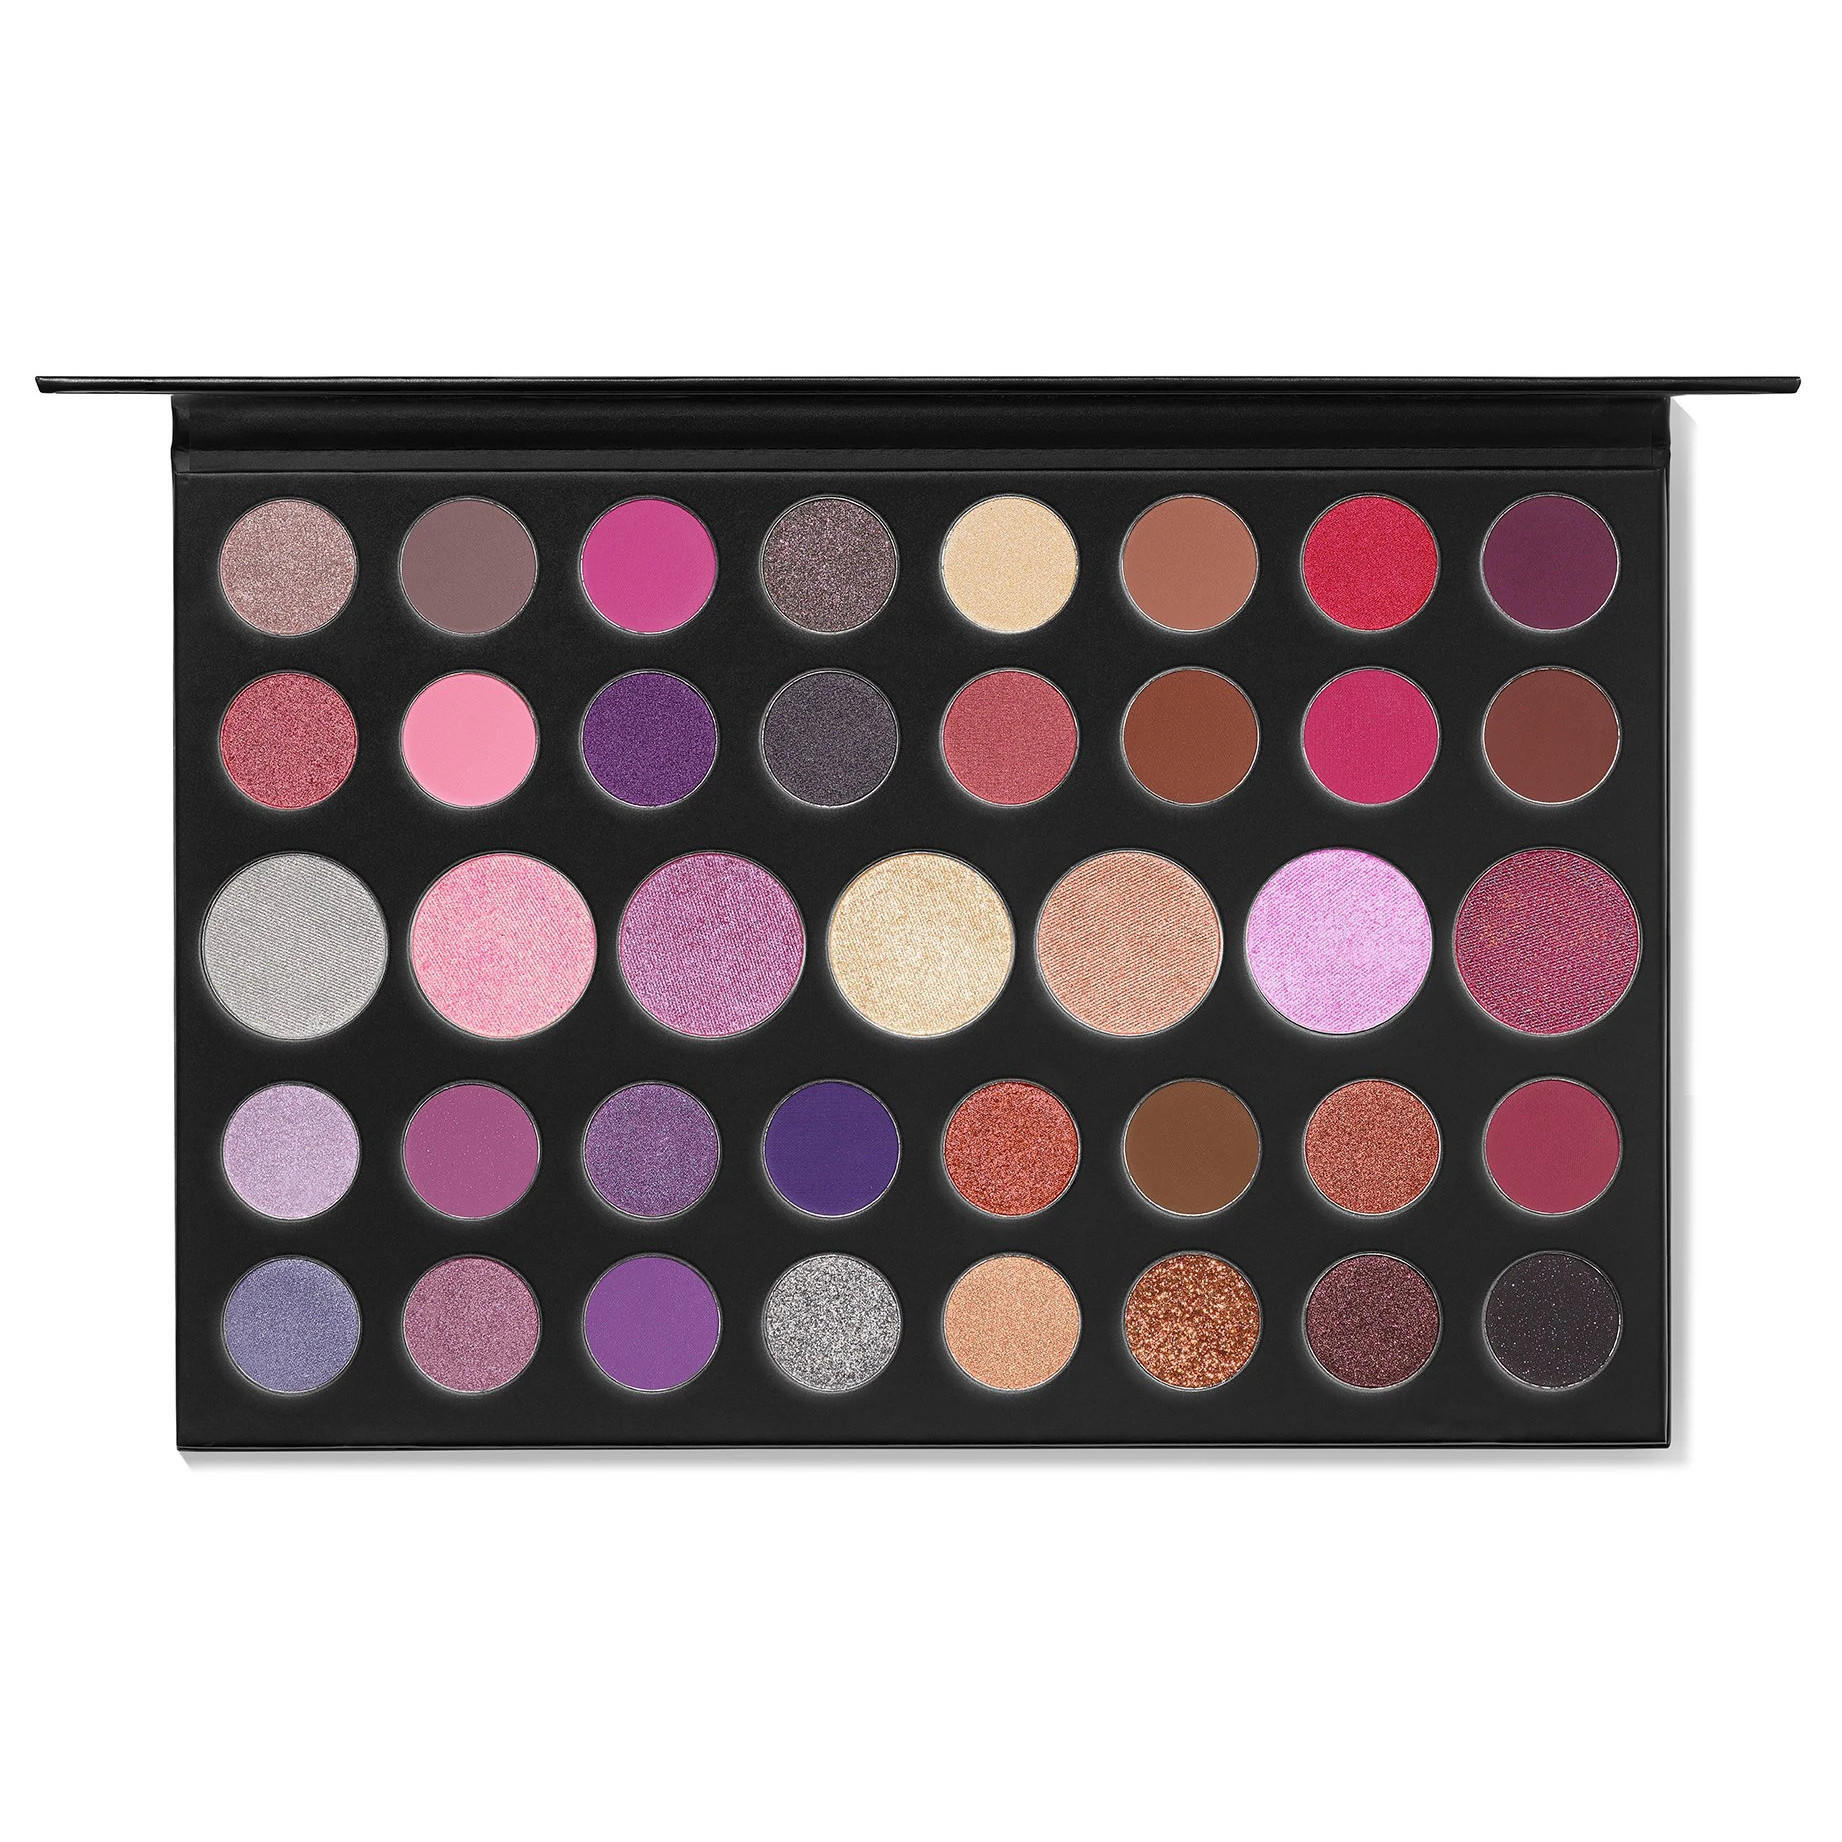 2nd Chance Morphe Artistry Palette Such A Gem 39S